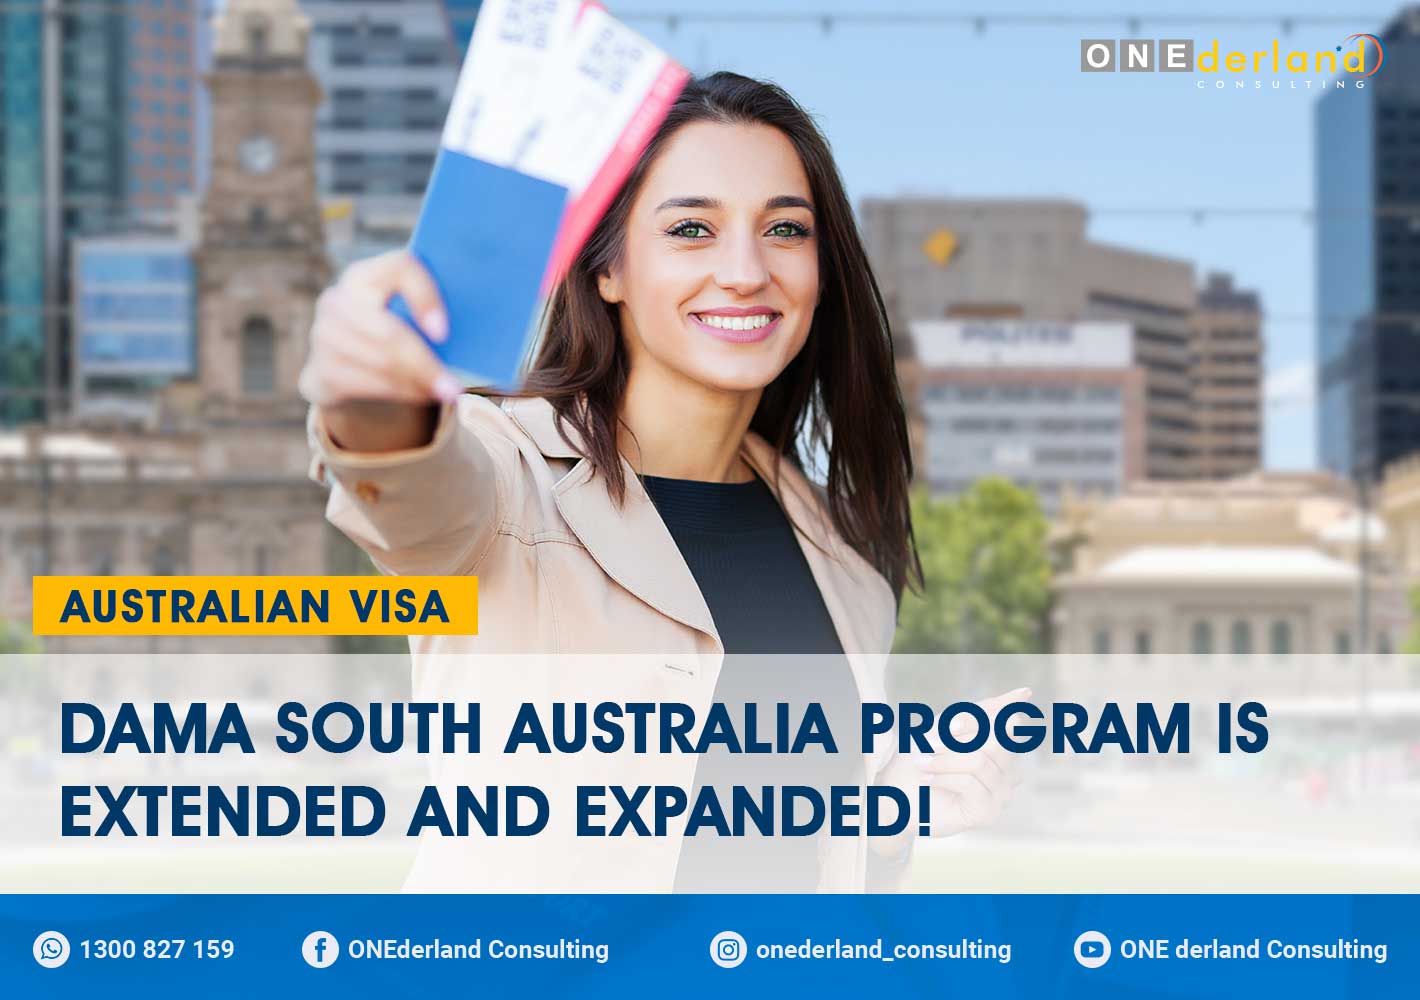 DAMA South Australia Program is Extended and Expanded!